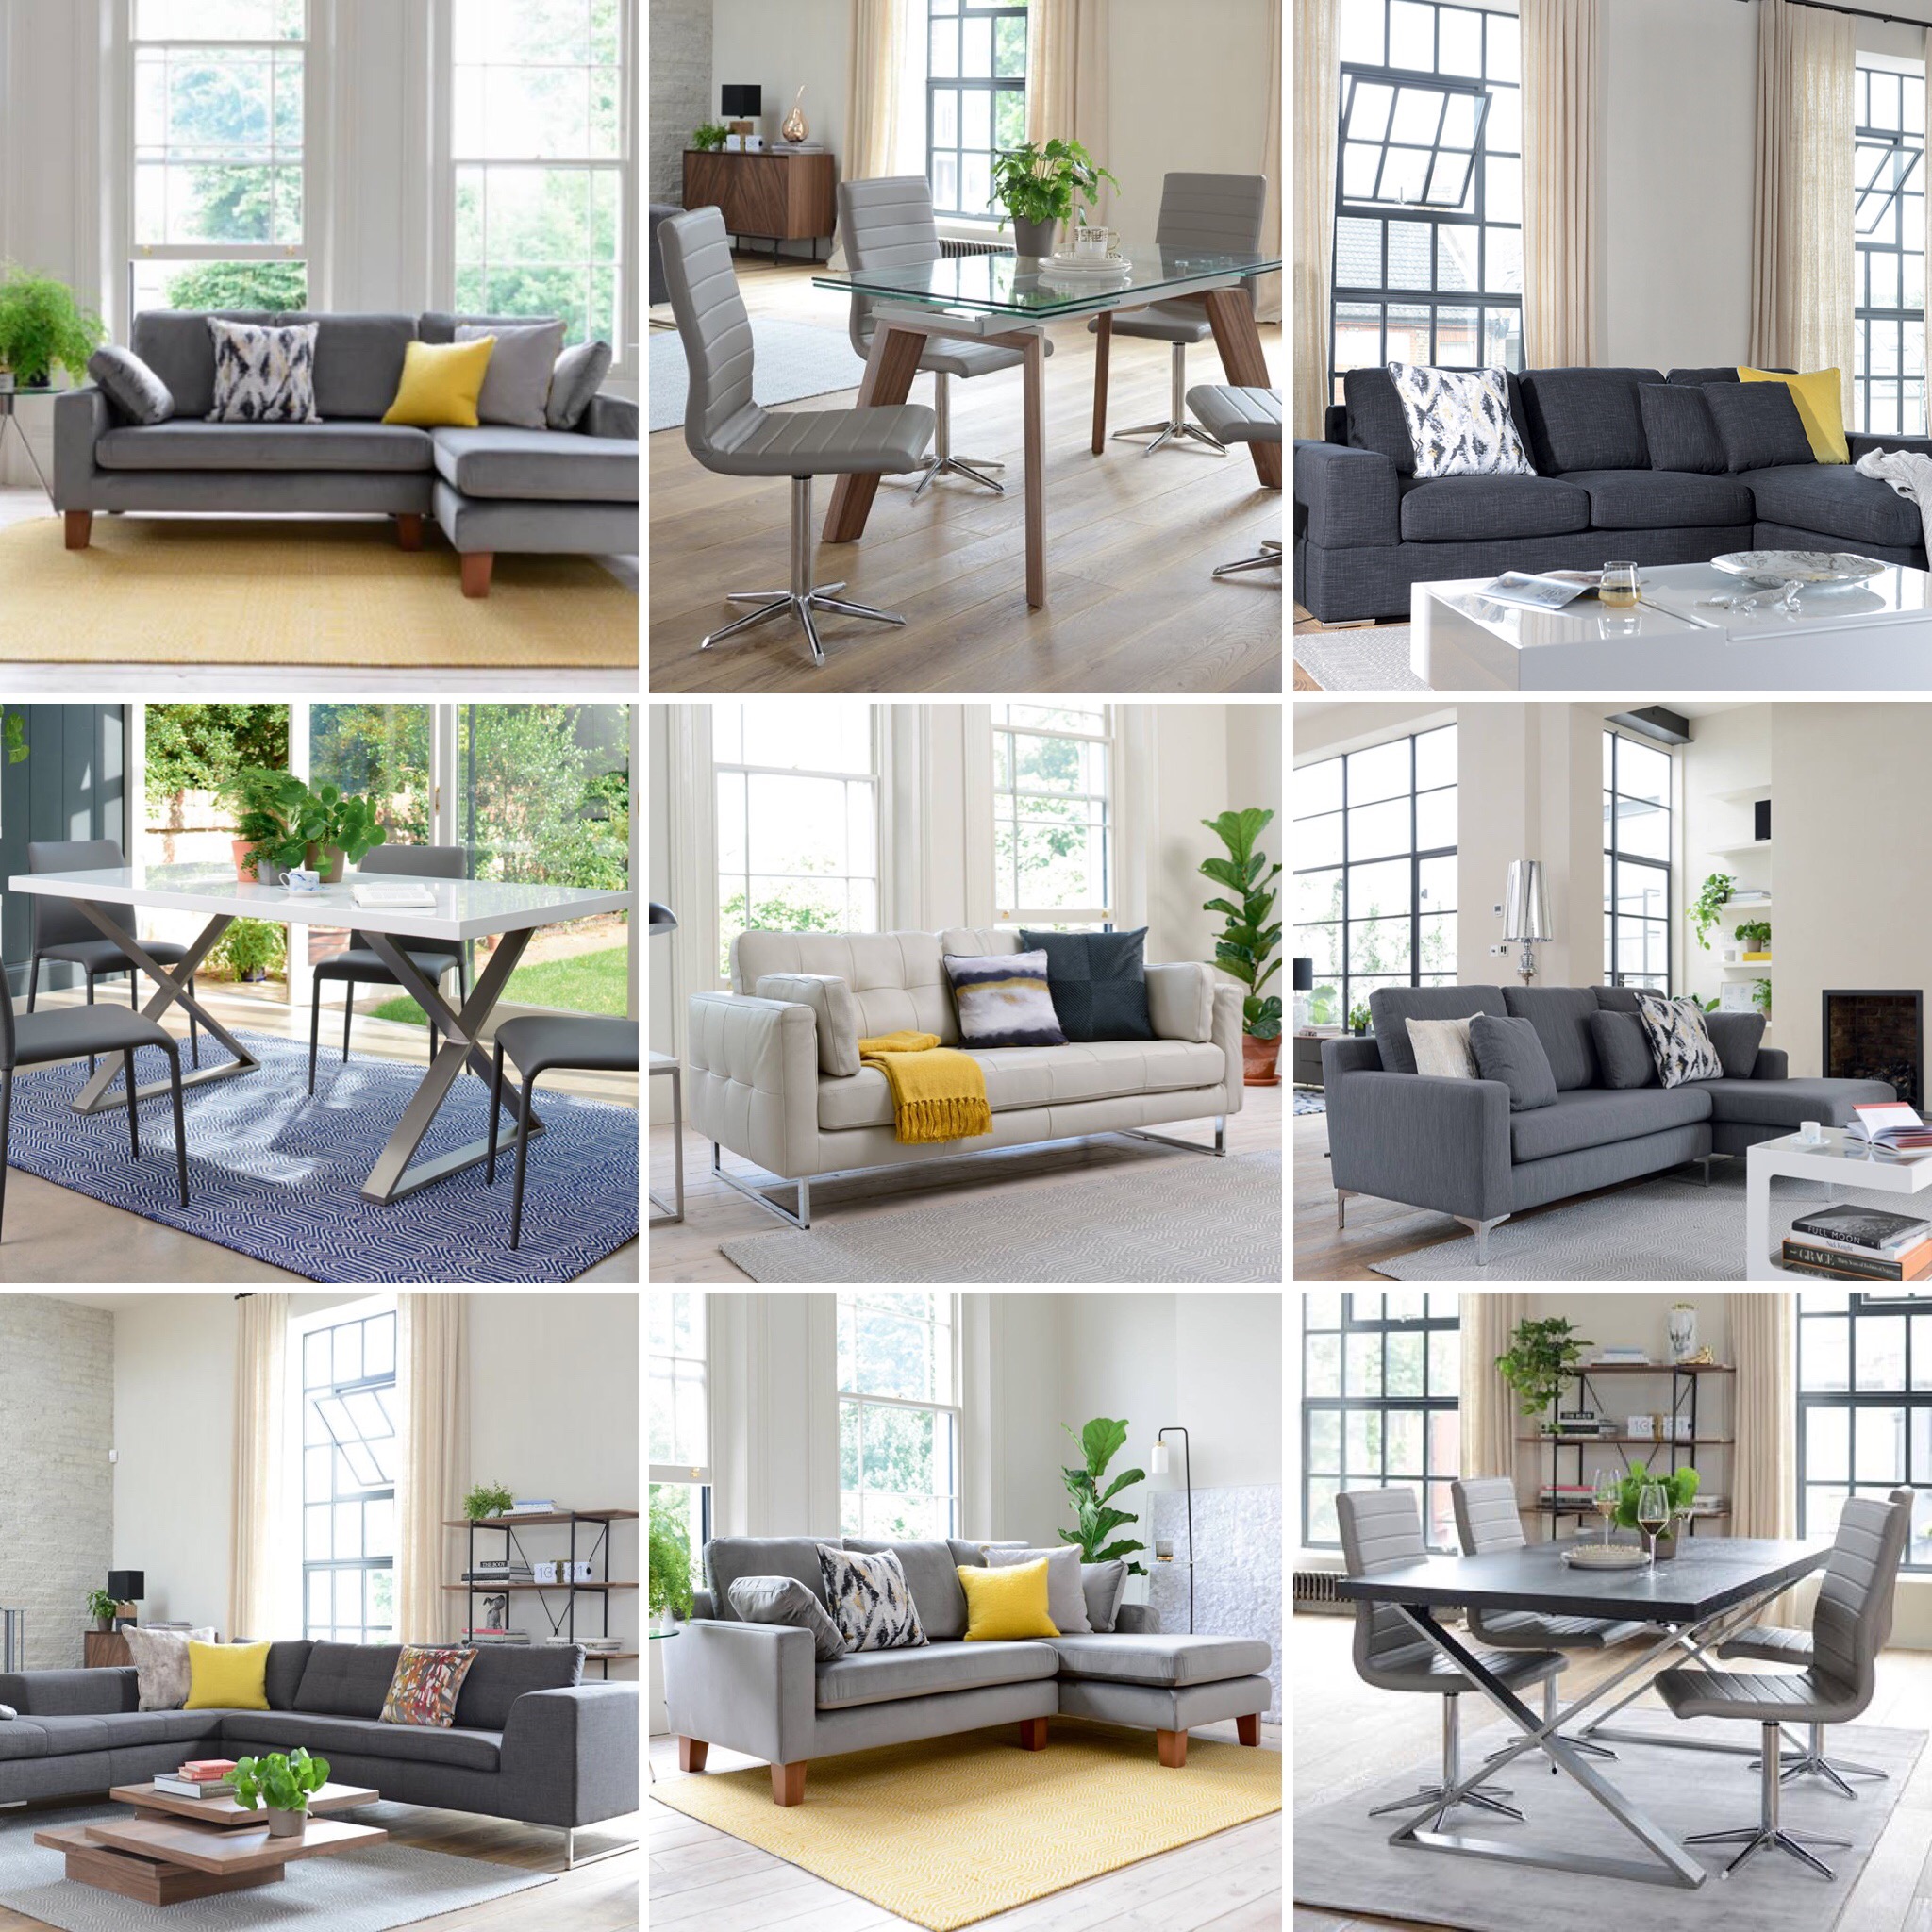 Dwell Interiors Lifestyle Shoot in Two London Locations